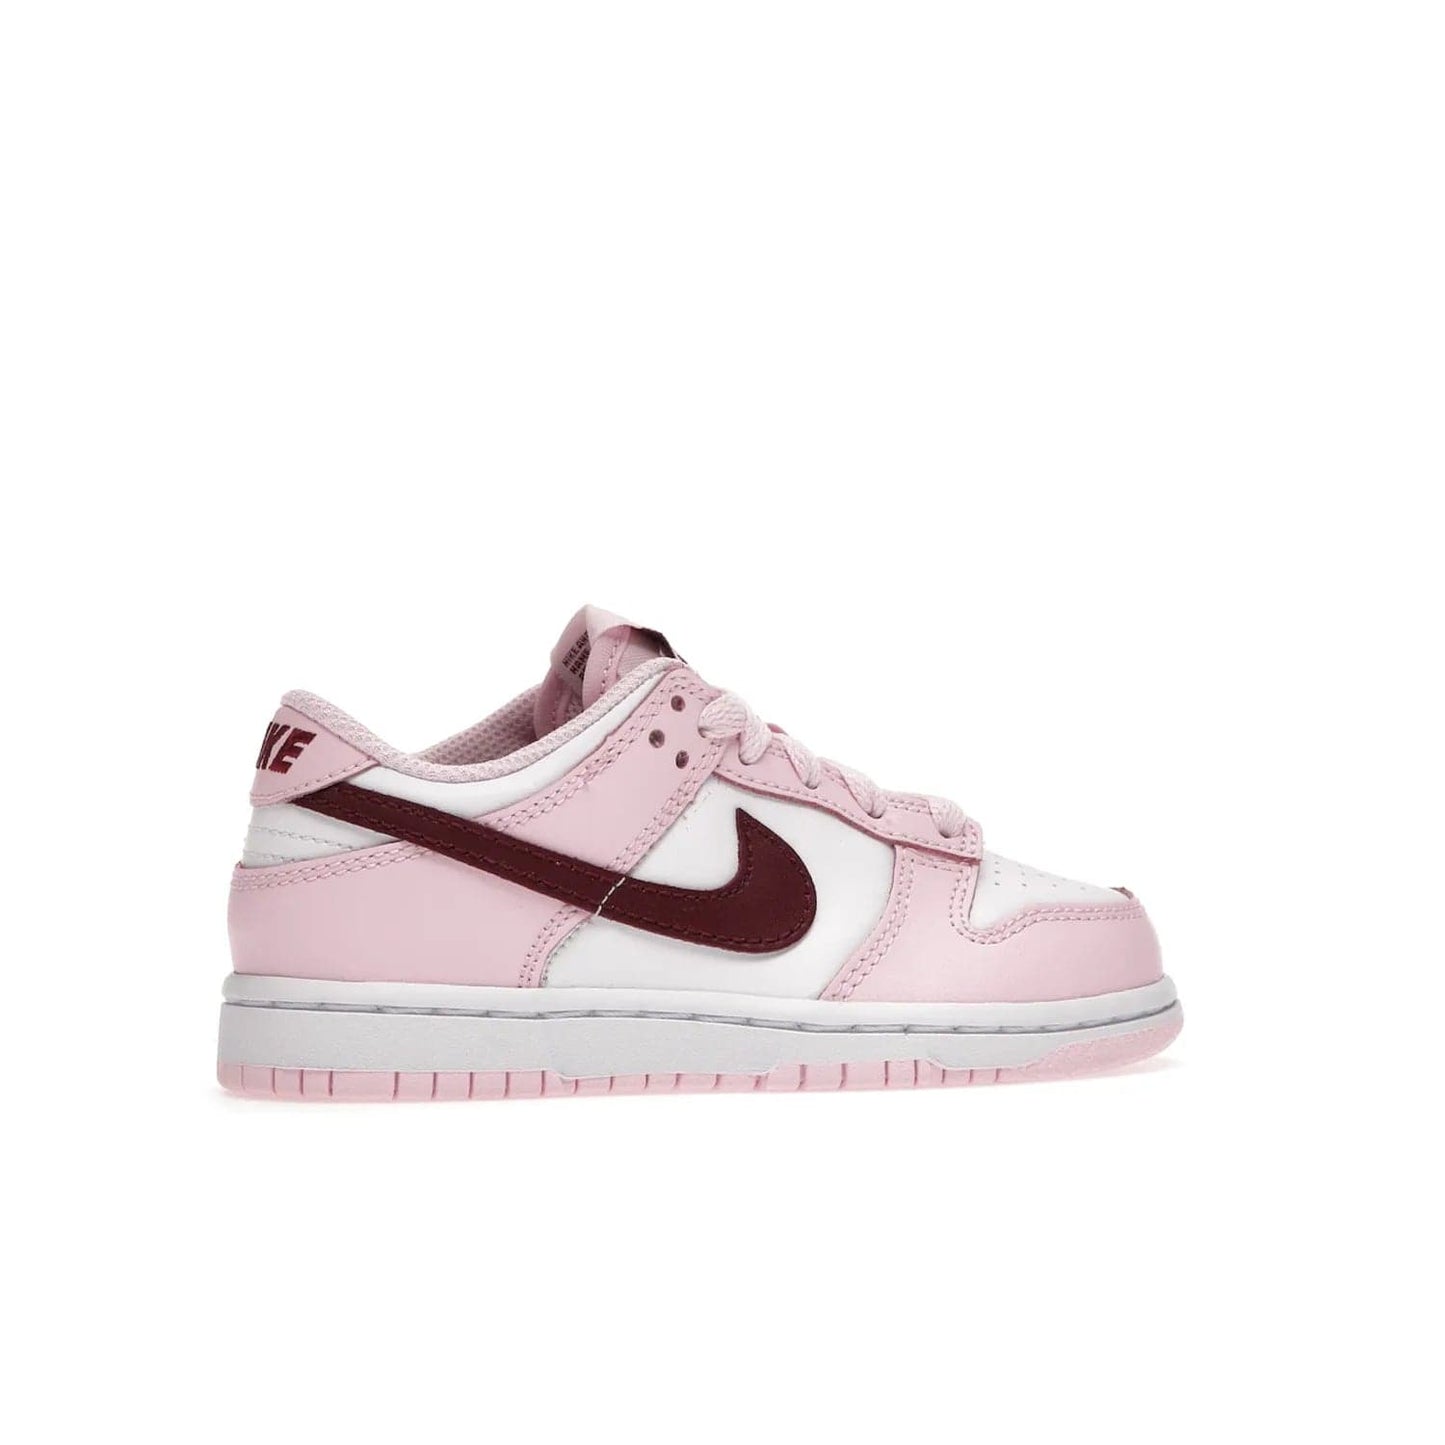 Nike Dunk Low Pink Red White (PS) - Image 35 - Only at www.BallersClubKickz.com - Introducing the Nike Dunk Low Pink Red White (PS), the perfect addition to your sneaker collection. A classic silhouette with modern vibrant colors, including a pink upper with red and white accents and a white midsole. Comfort and durability, perfect for any outfit. Limited edition, available June 22nd.